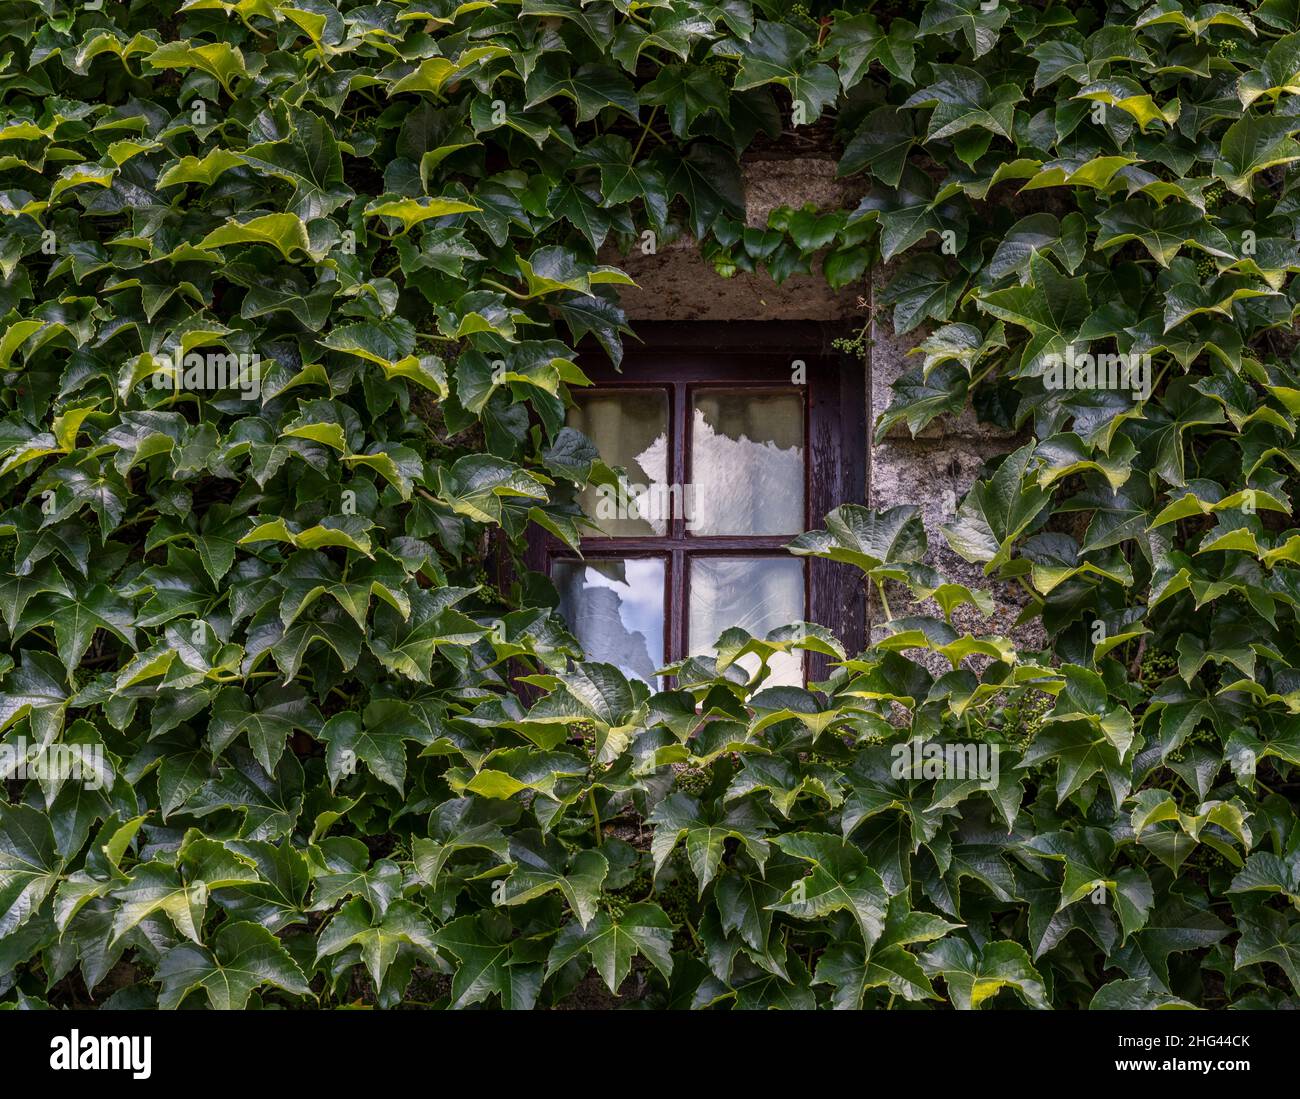 Small window with ivy in France. Stock Photo